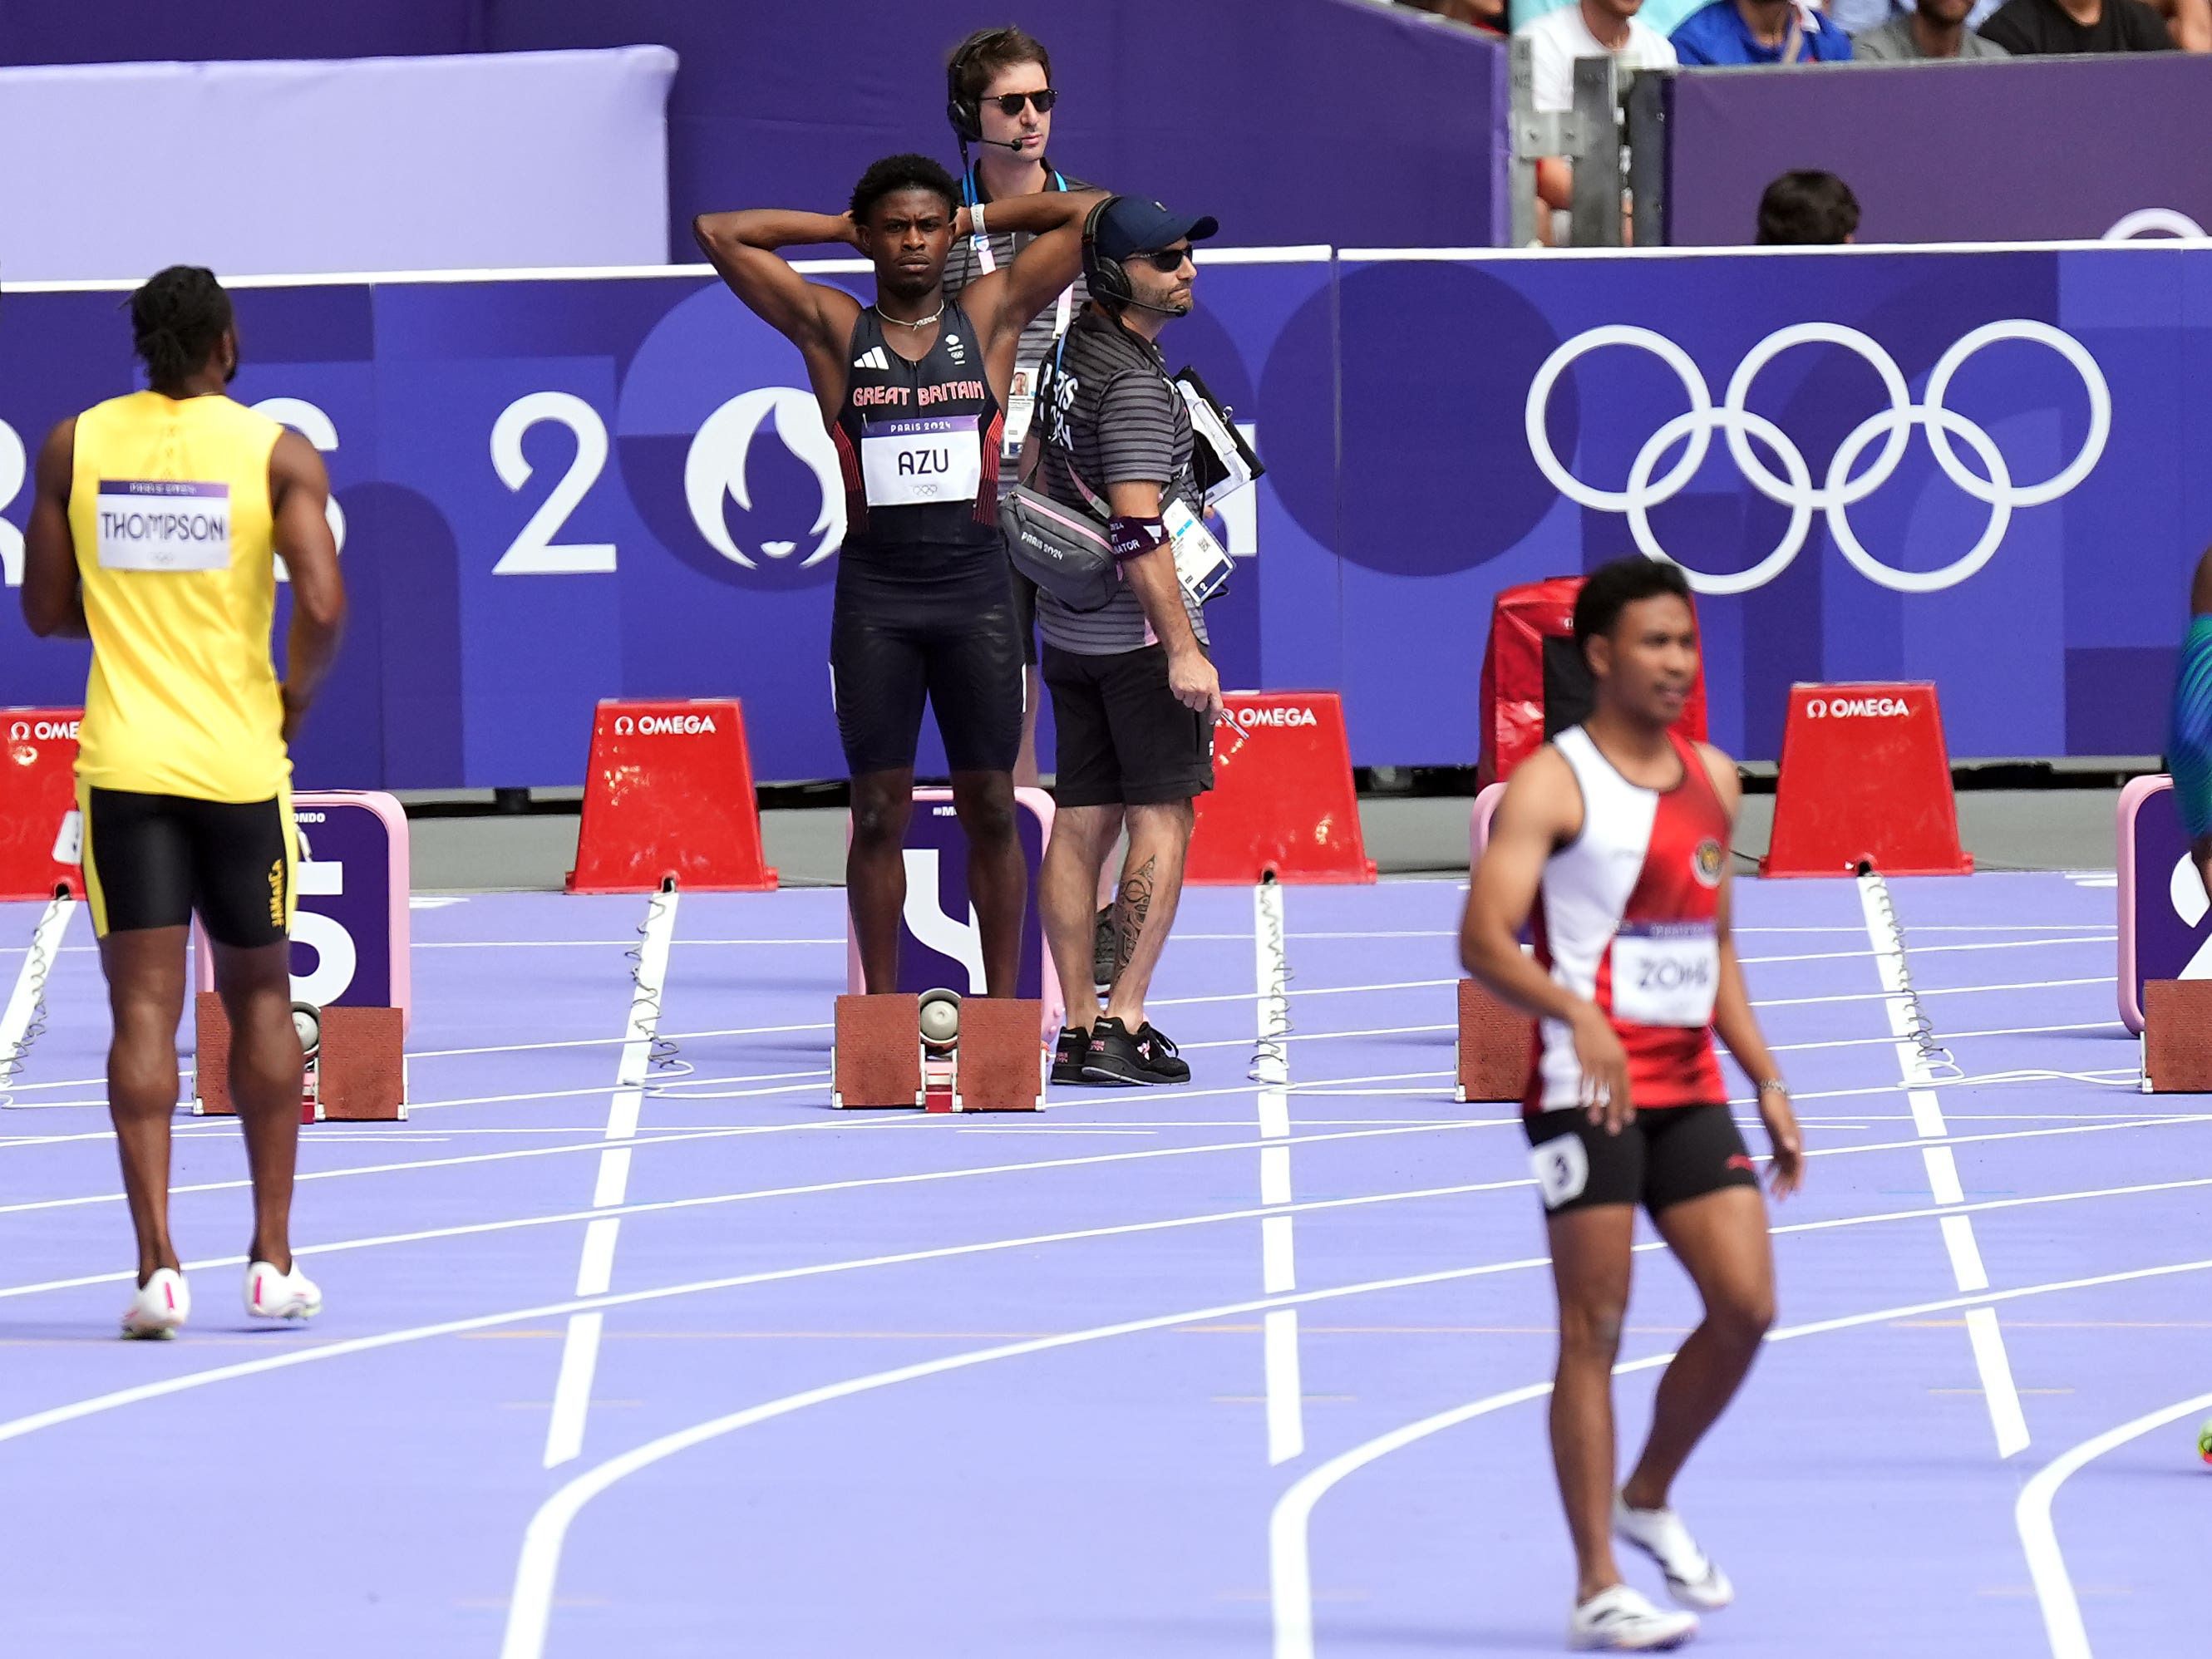 Despair for Jeremiah Azu after disqualification from 100 metre